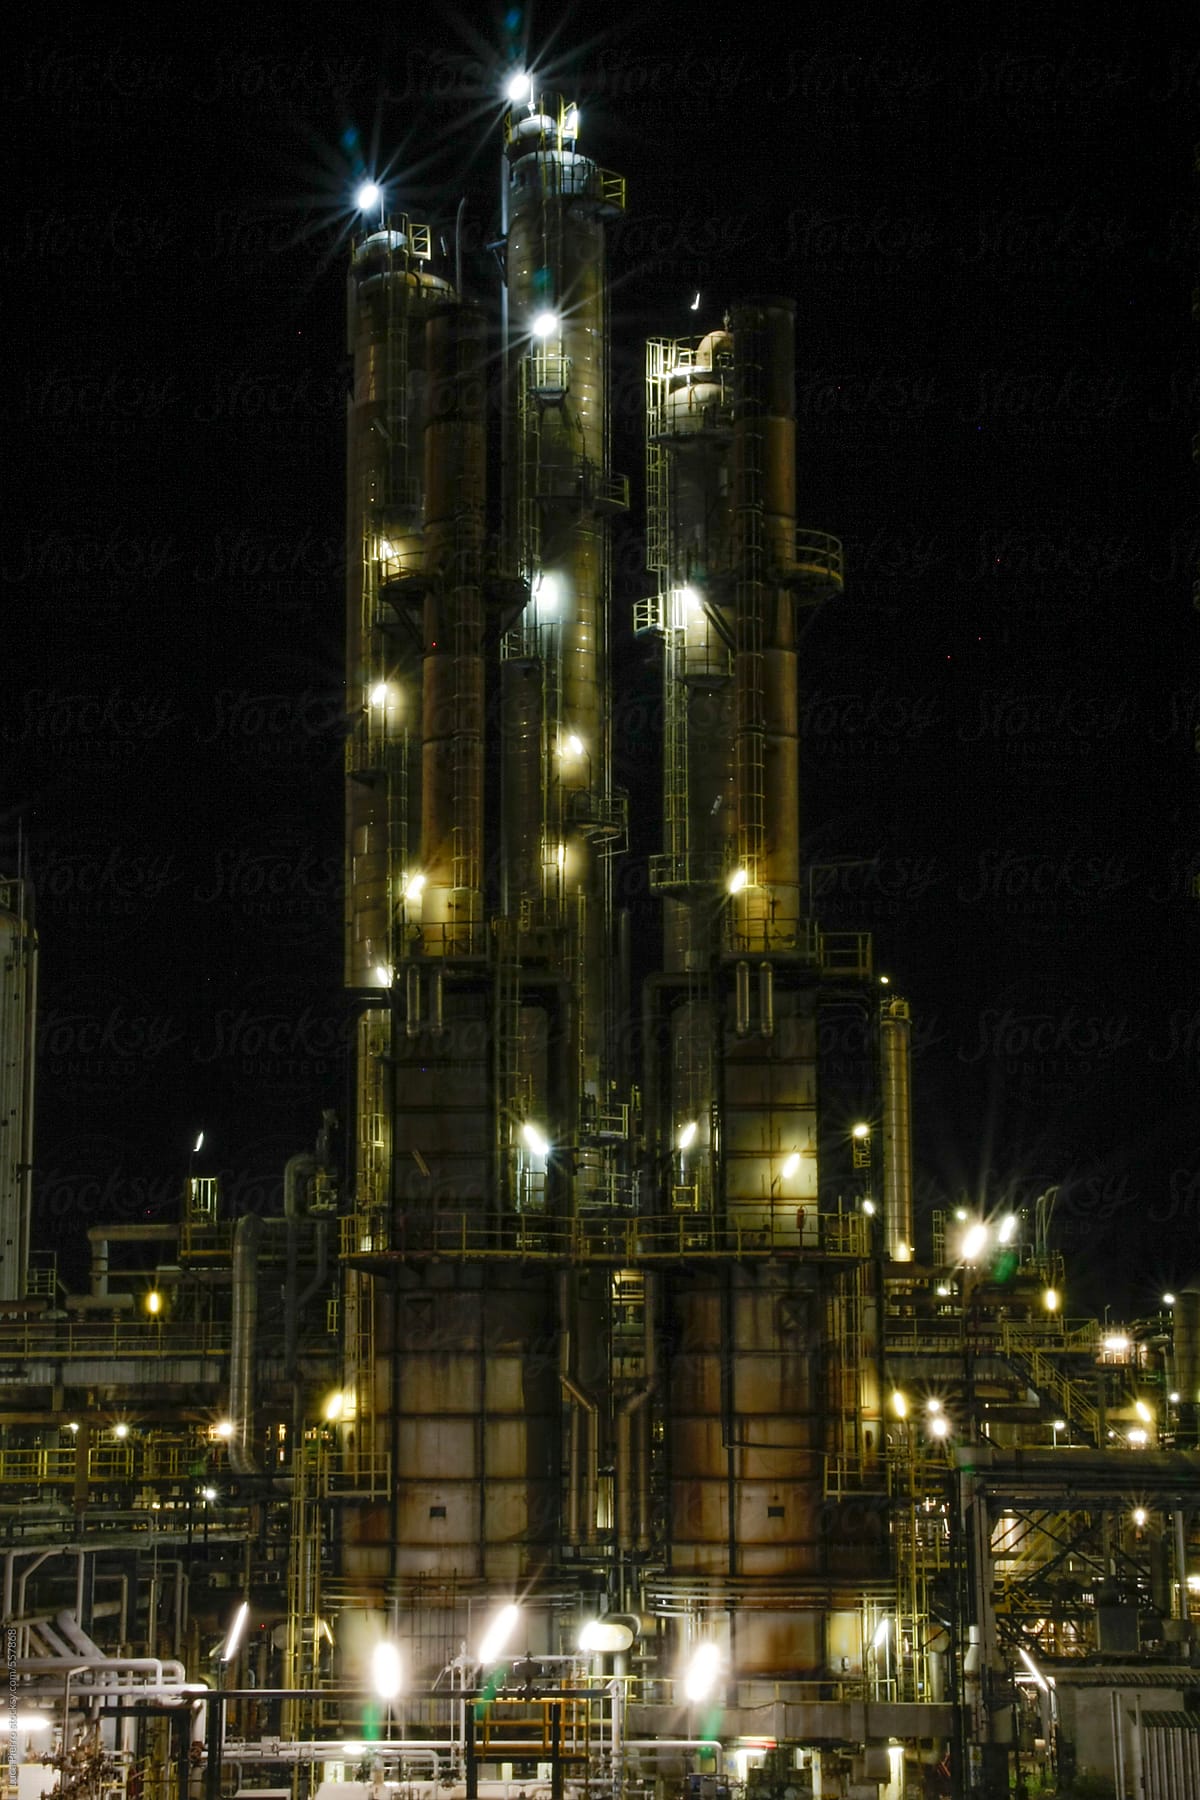 Oil refinery site at night